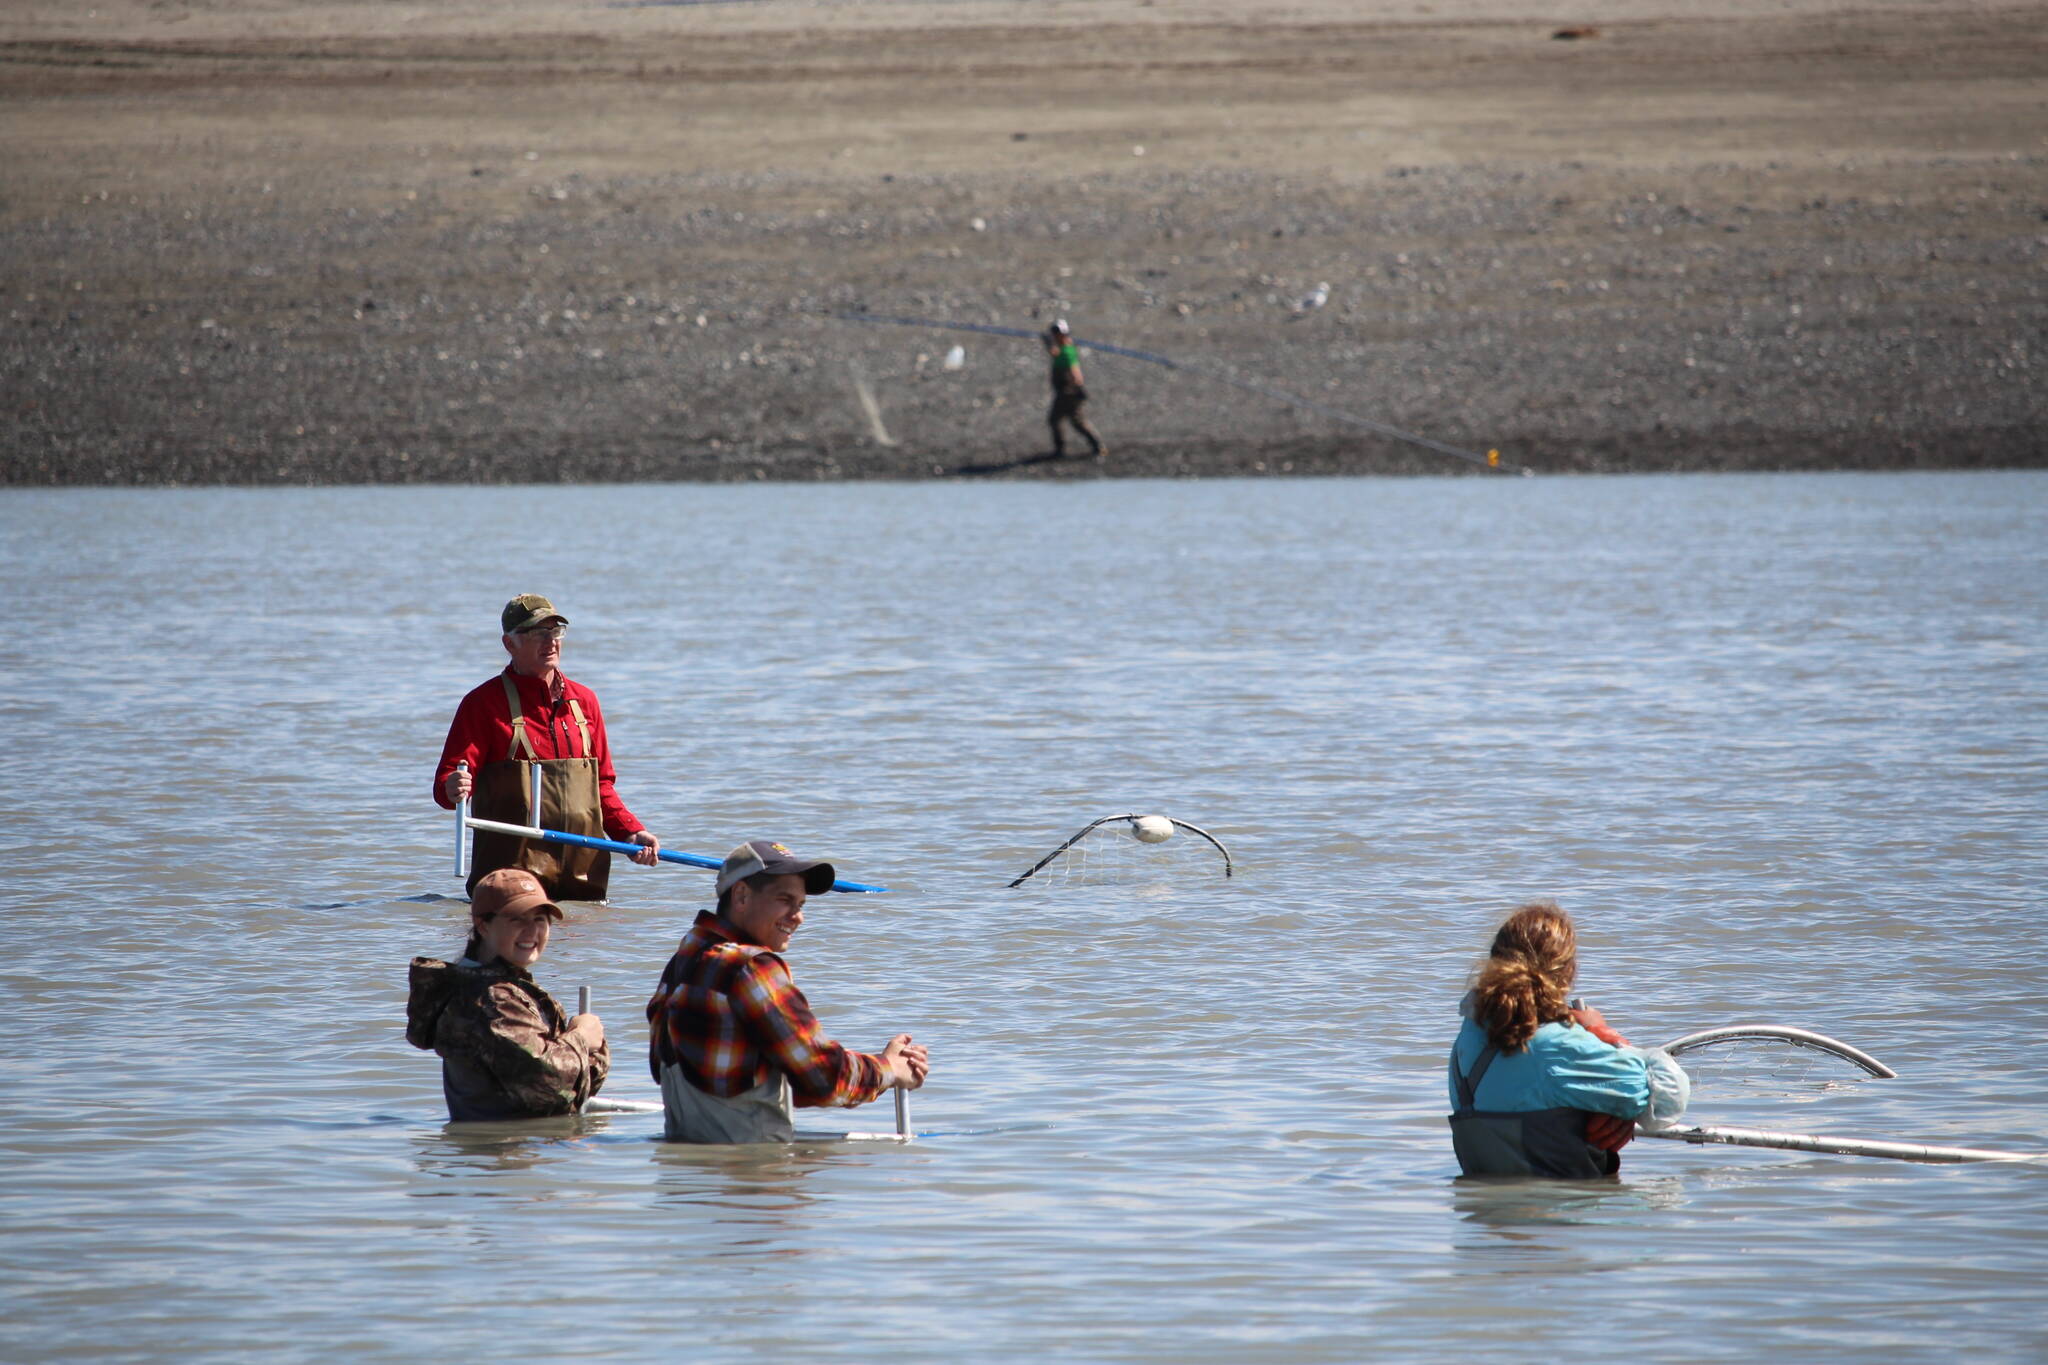 Dipnetters can be seen here fishing in the Kenai River on July 10, 2020. (Photo by Brian Mazurek/Peninsula Clarion file)